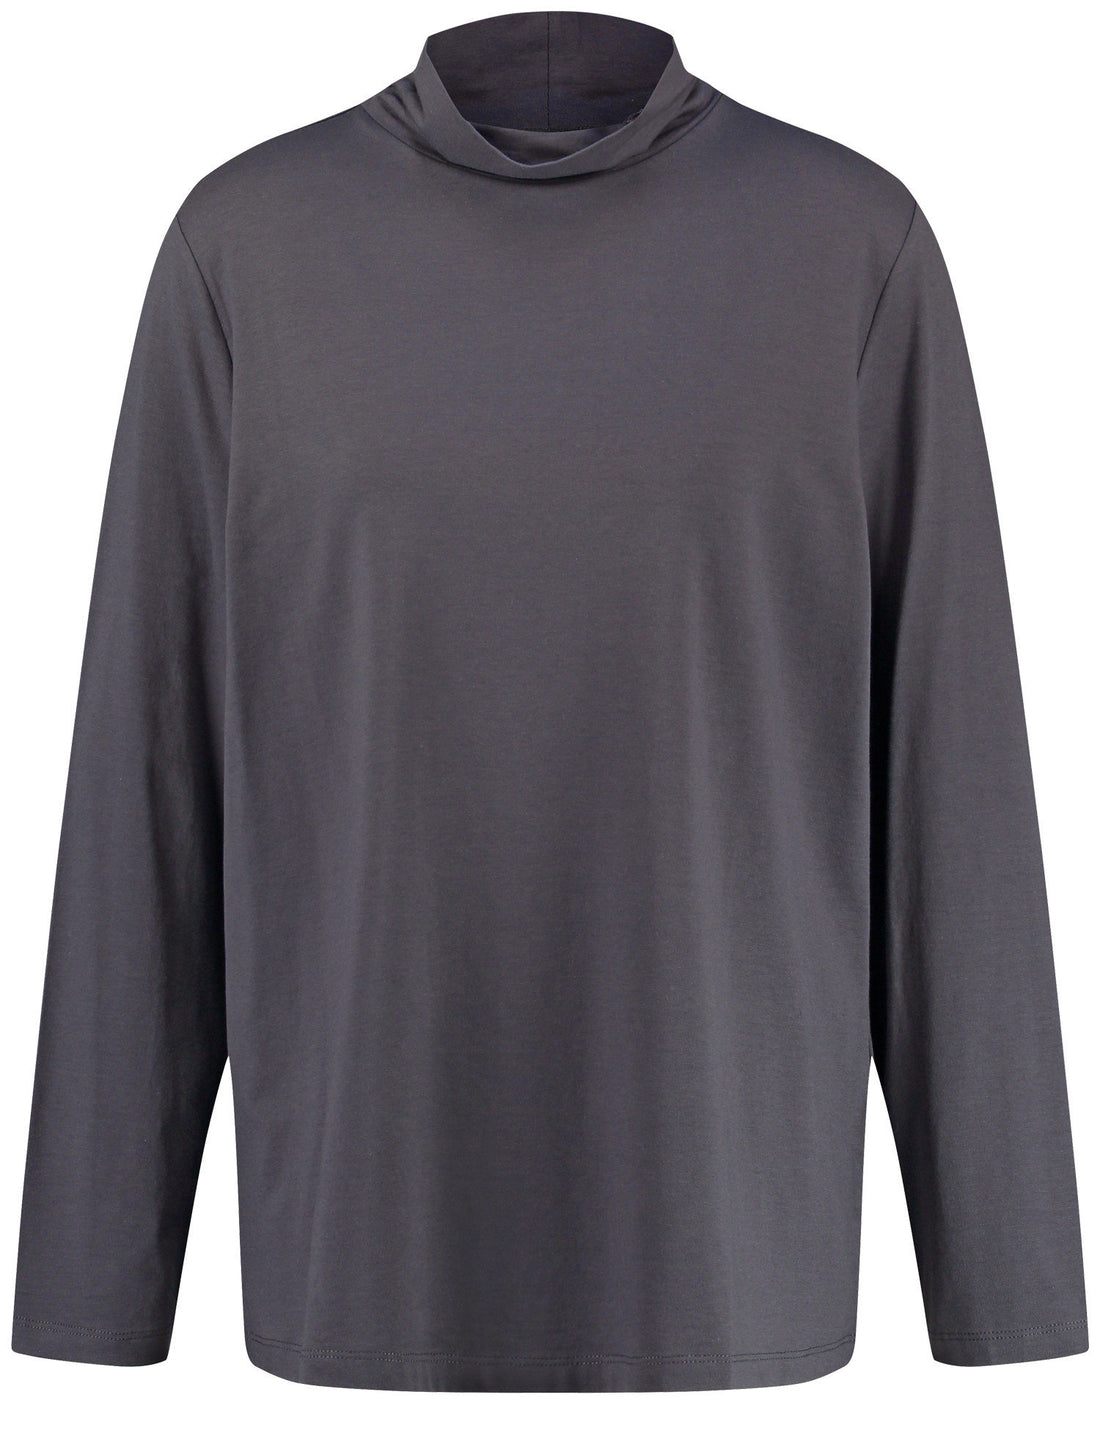 Long Sleeve Top With A Stand-Up Collar_371256-26426_2220_02